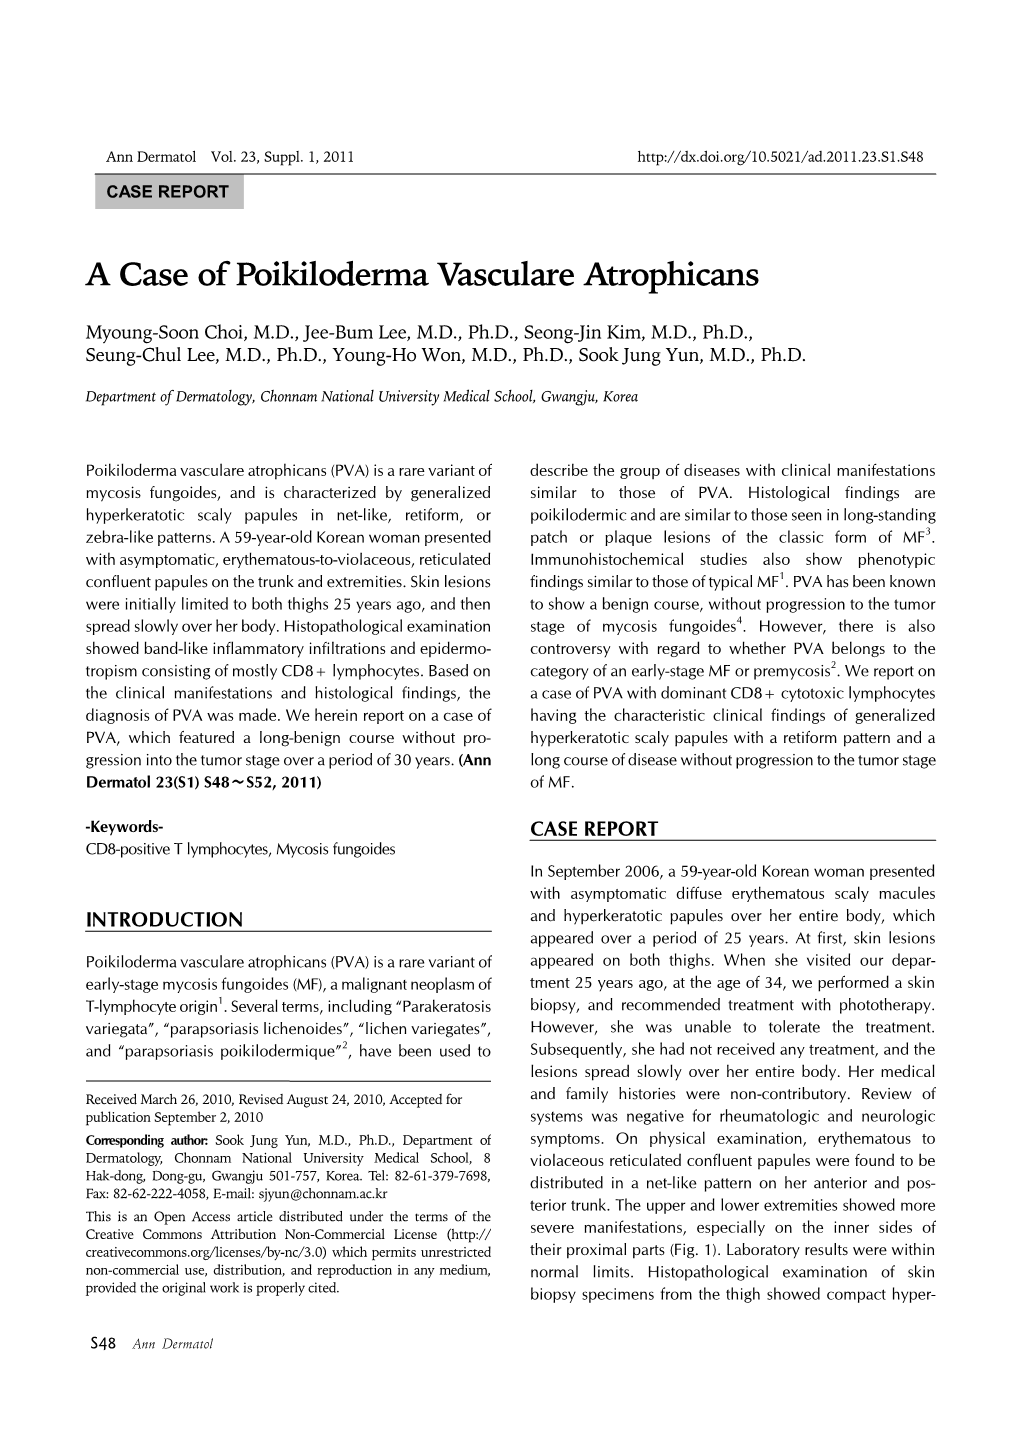 A Case of Poikiloderma Vasculare Atrophicans